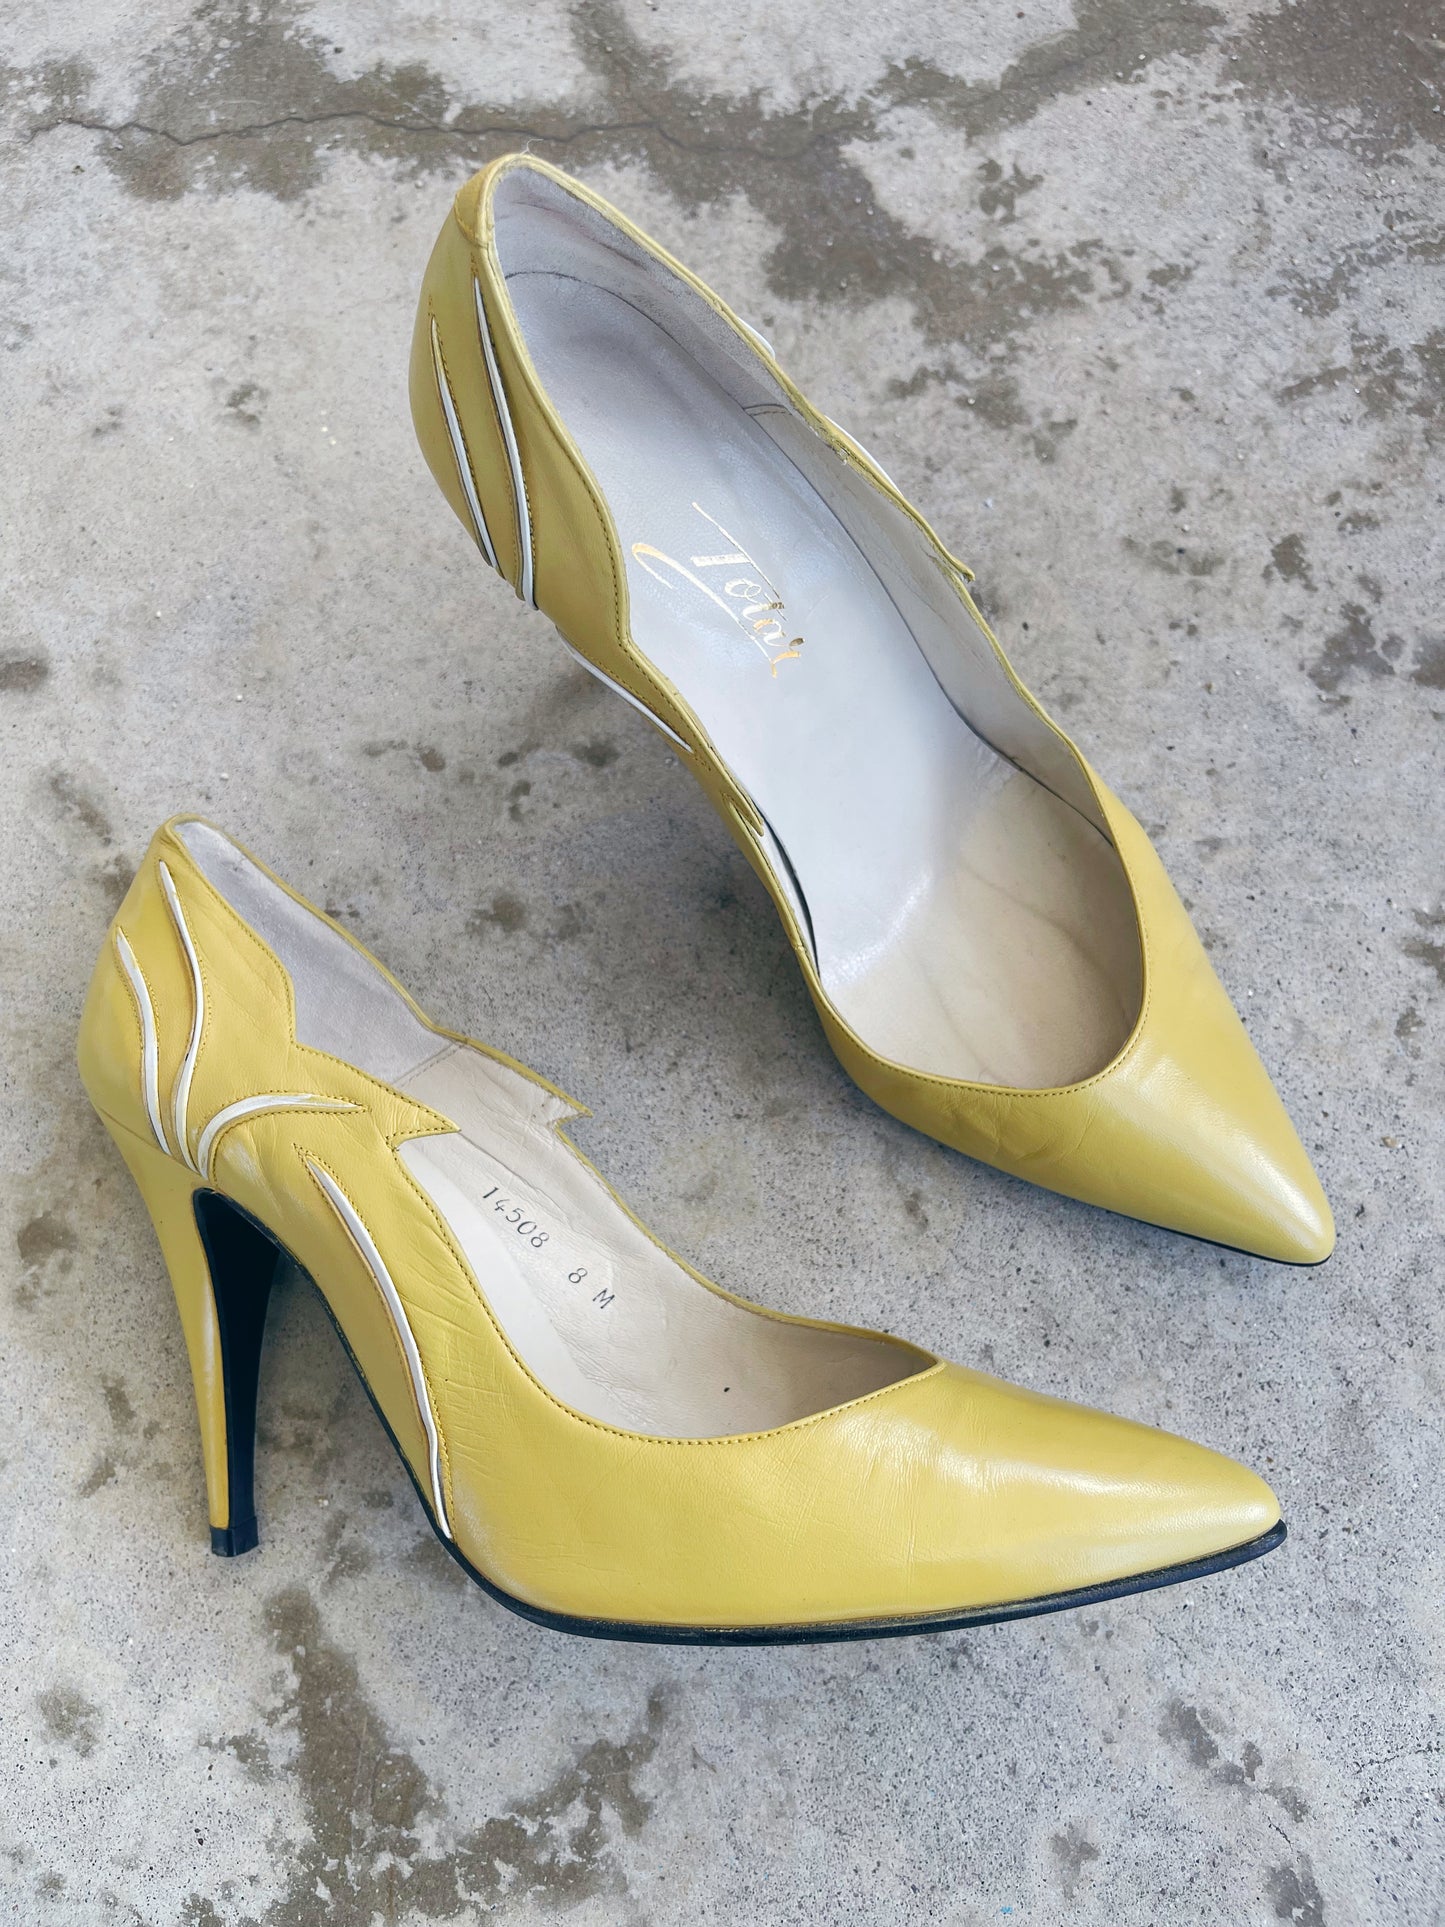 Vintage 70s / 80s "Totar" Brand Mellow Yellow with White Trim 4” Heels US Size 8 *Shoe Box Not Included*